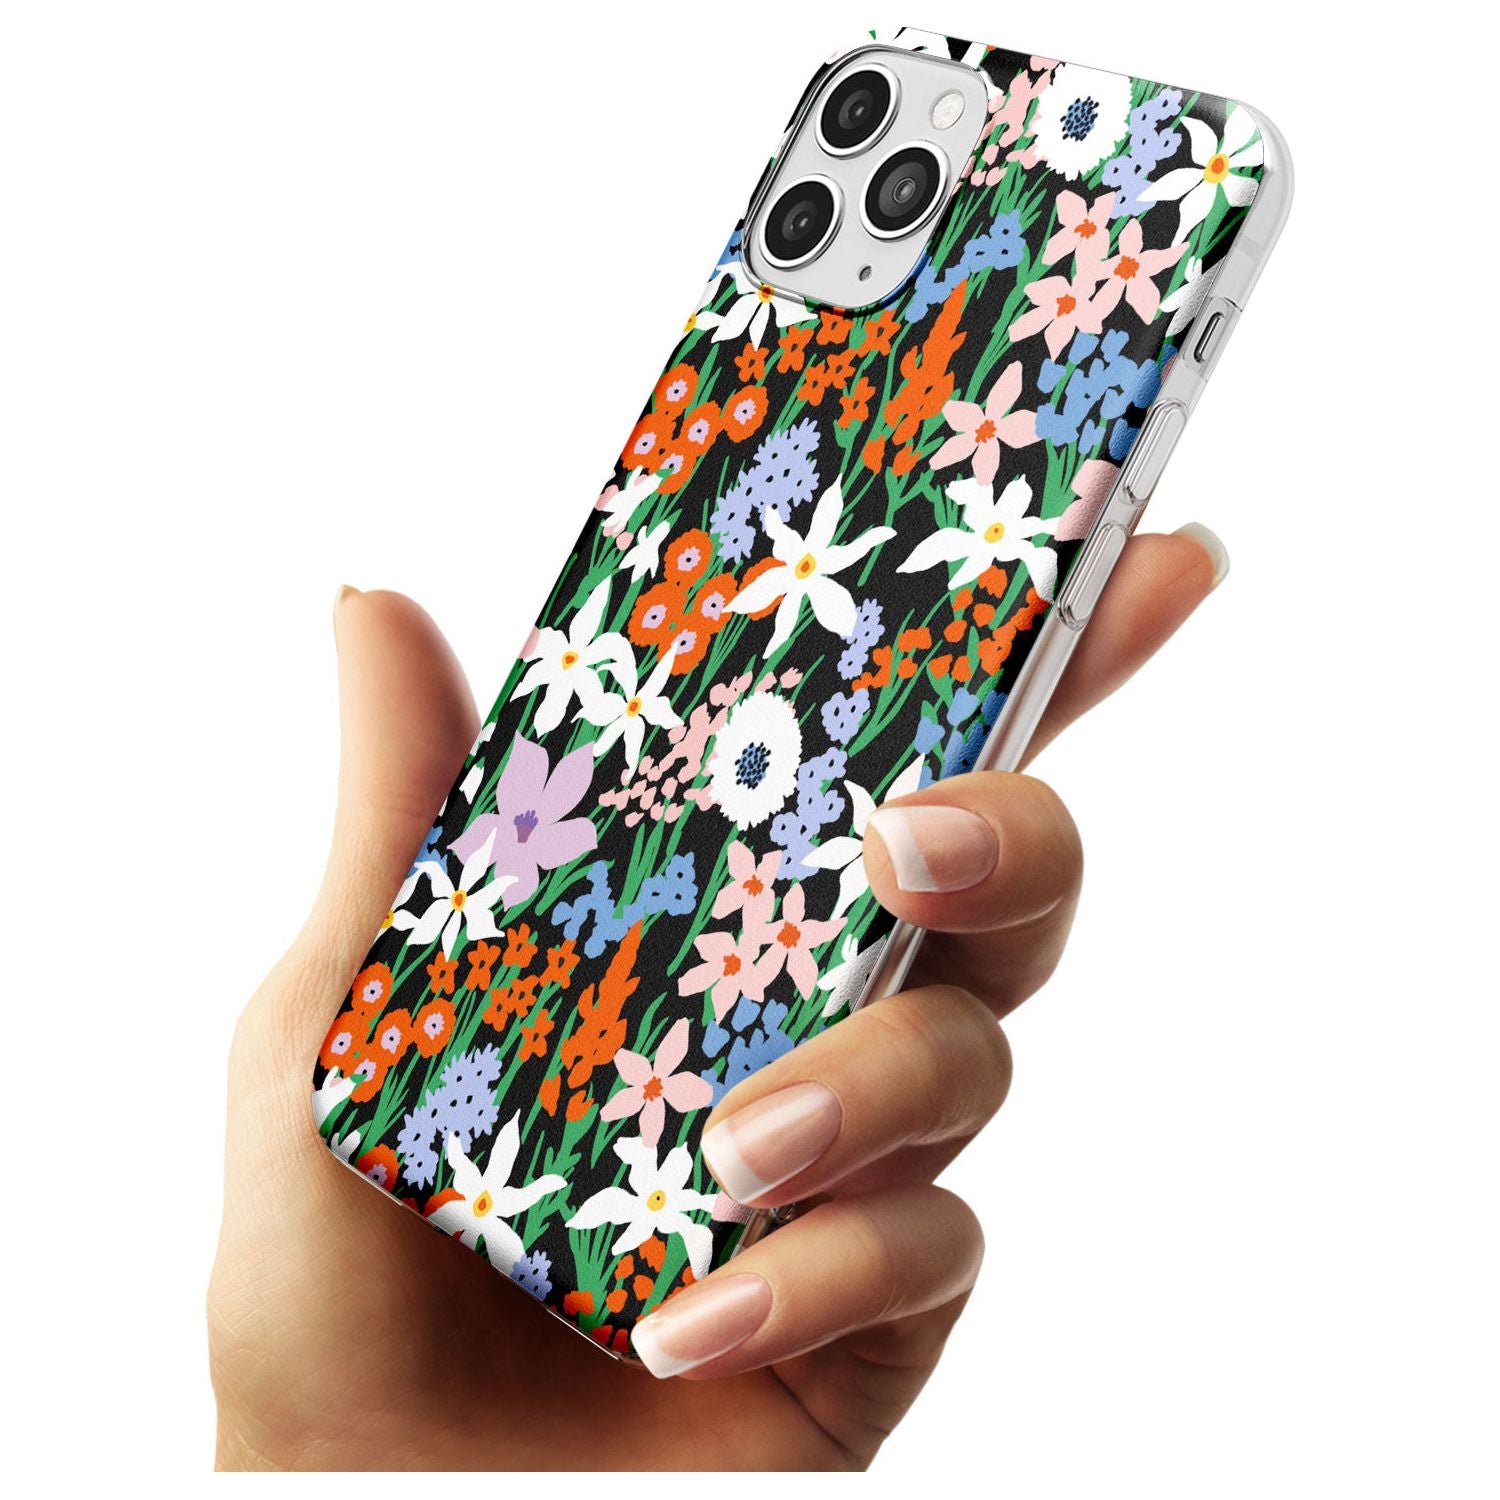 Springtime Meadow: Solid Black Impact Phone Case for iPhone 11 Pro Max